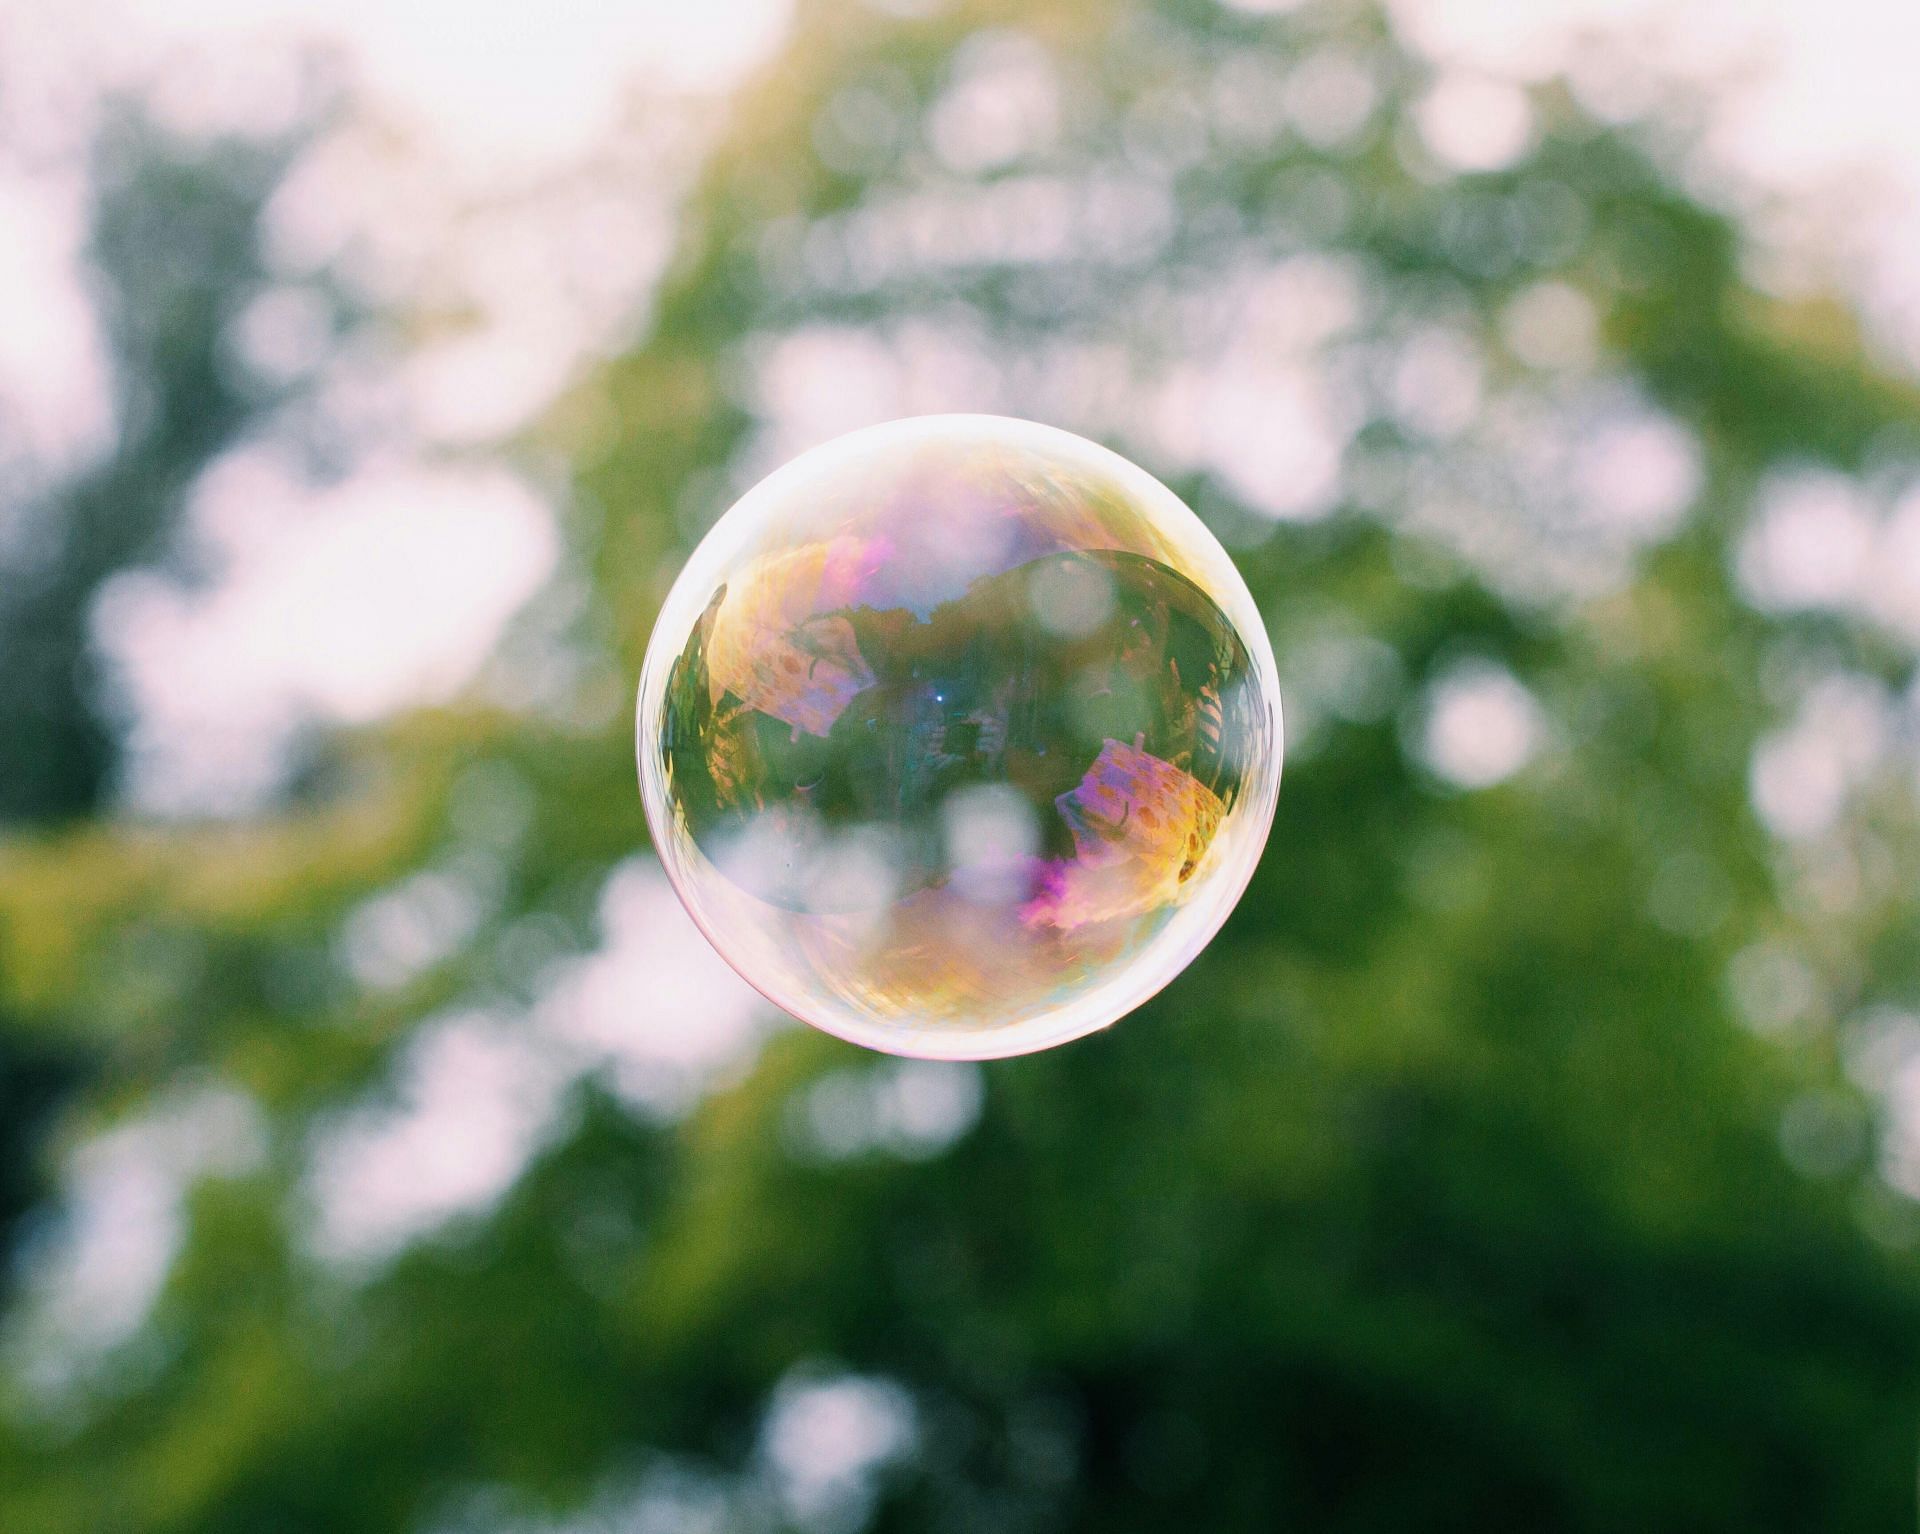 Breathing exercises for kids: Making bubbles can be a great breathing exercise (Image by Braedon Mcleod/Unsplash)